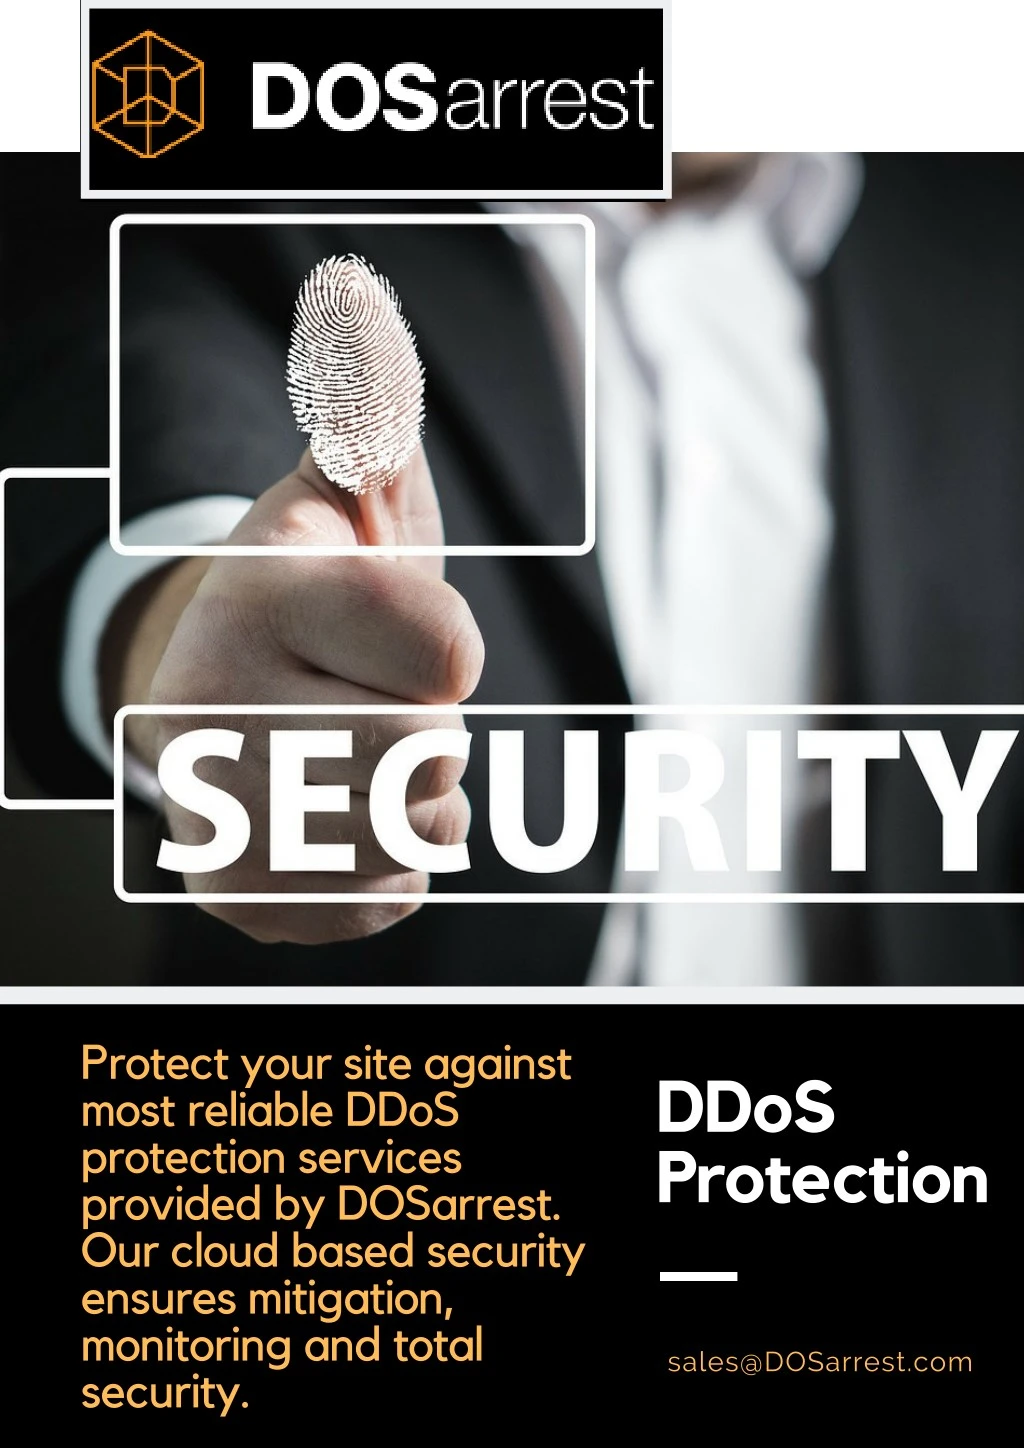 protect your site against most reliable ddos